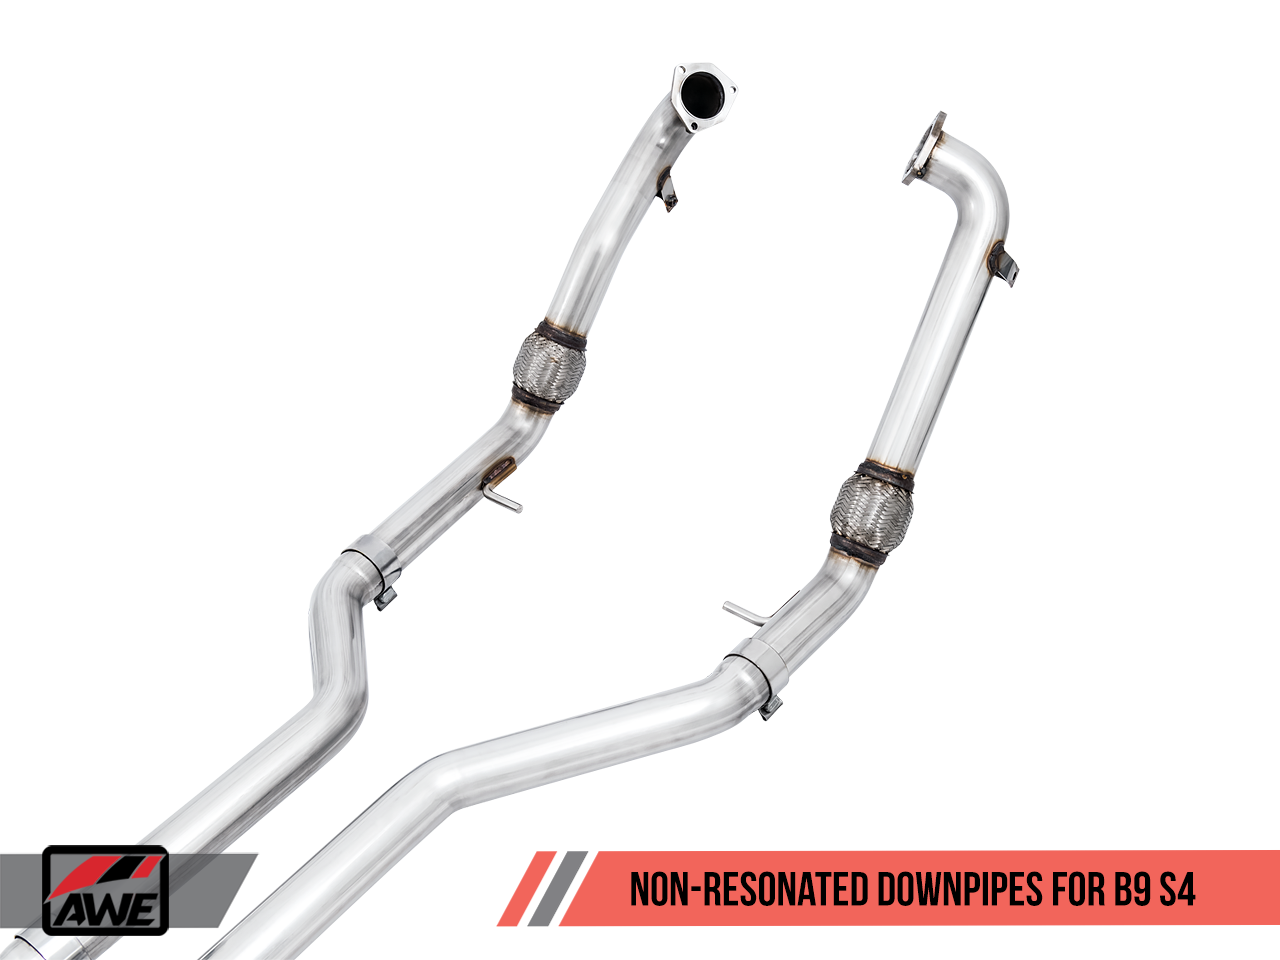 AWE Track Edition Exhaust for Audi B9 S4 - Non-Resonated - Diamond Black 90mm Tips